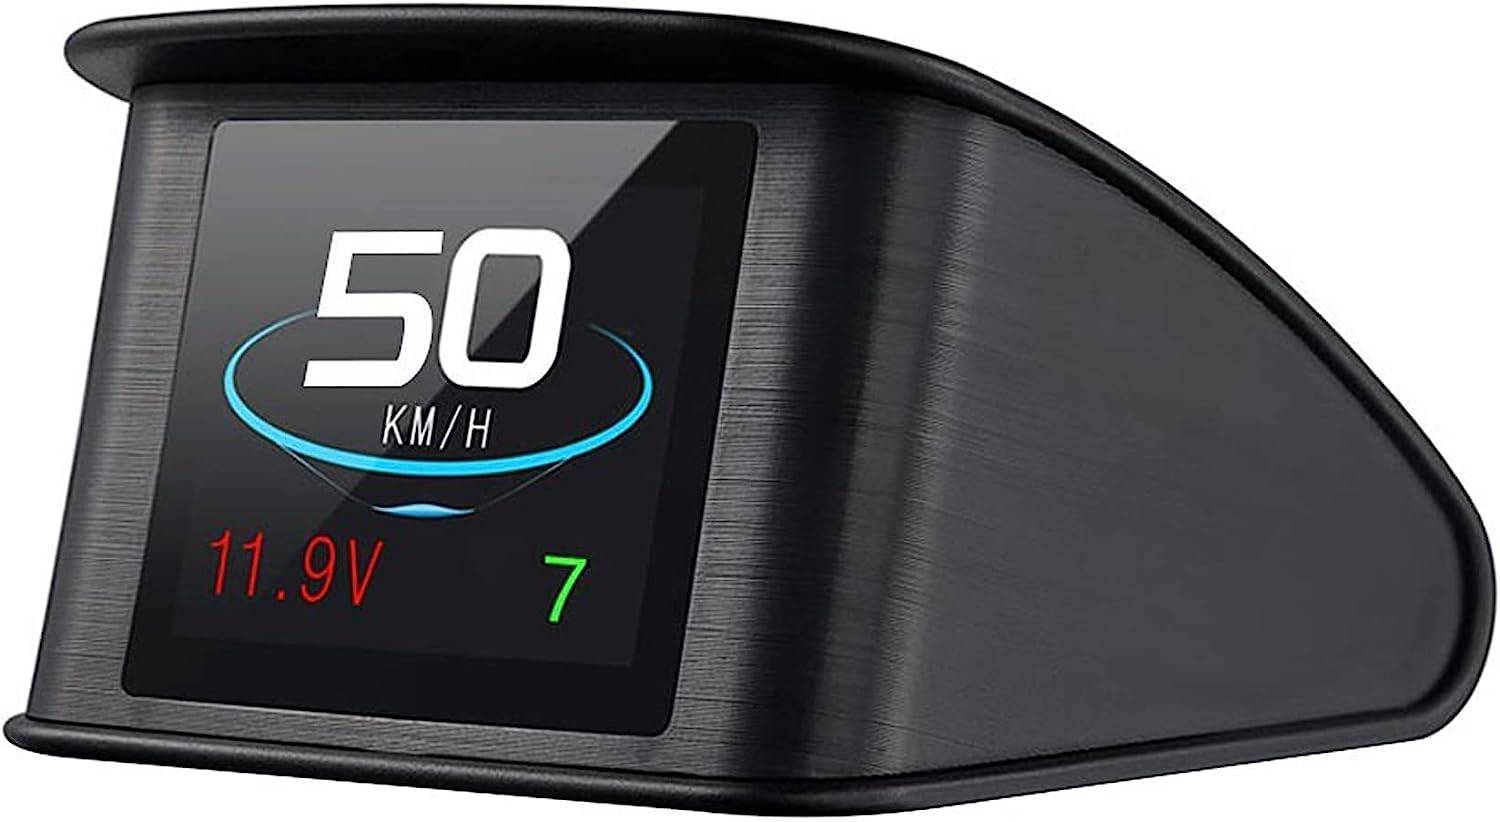 T600 universal heads up display system